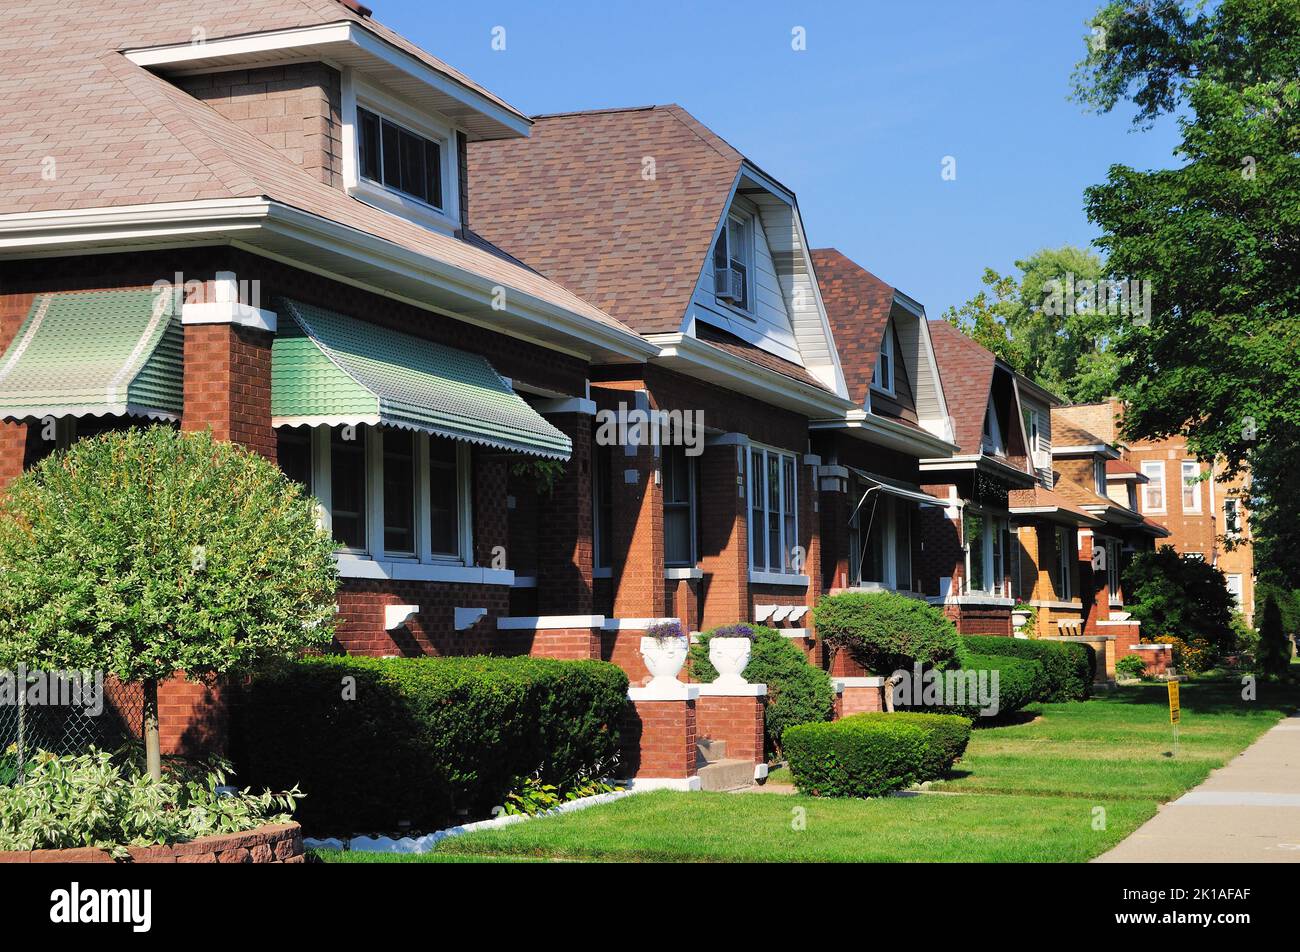 Chicago, Illinois, USA. Row of bungalow-style homes that occupy blocks of residential communities in Chicago. Stock Photo